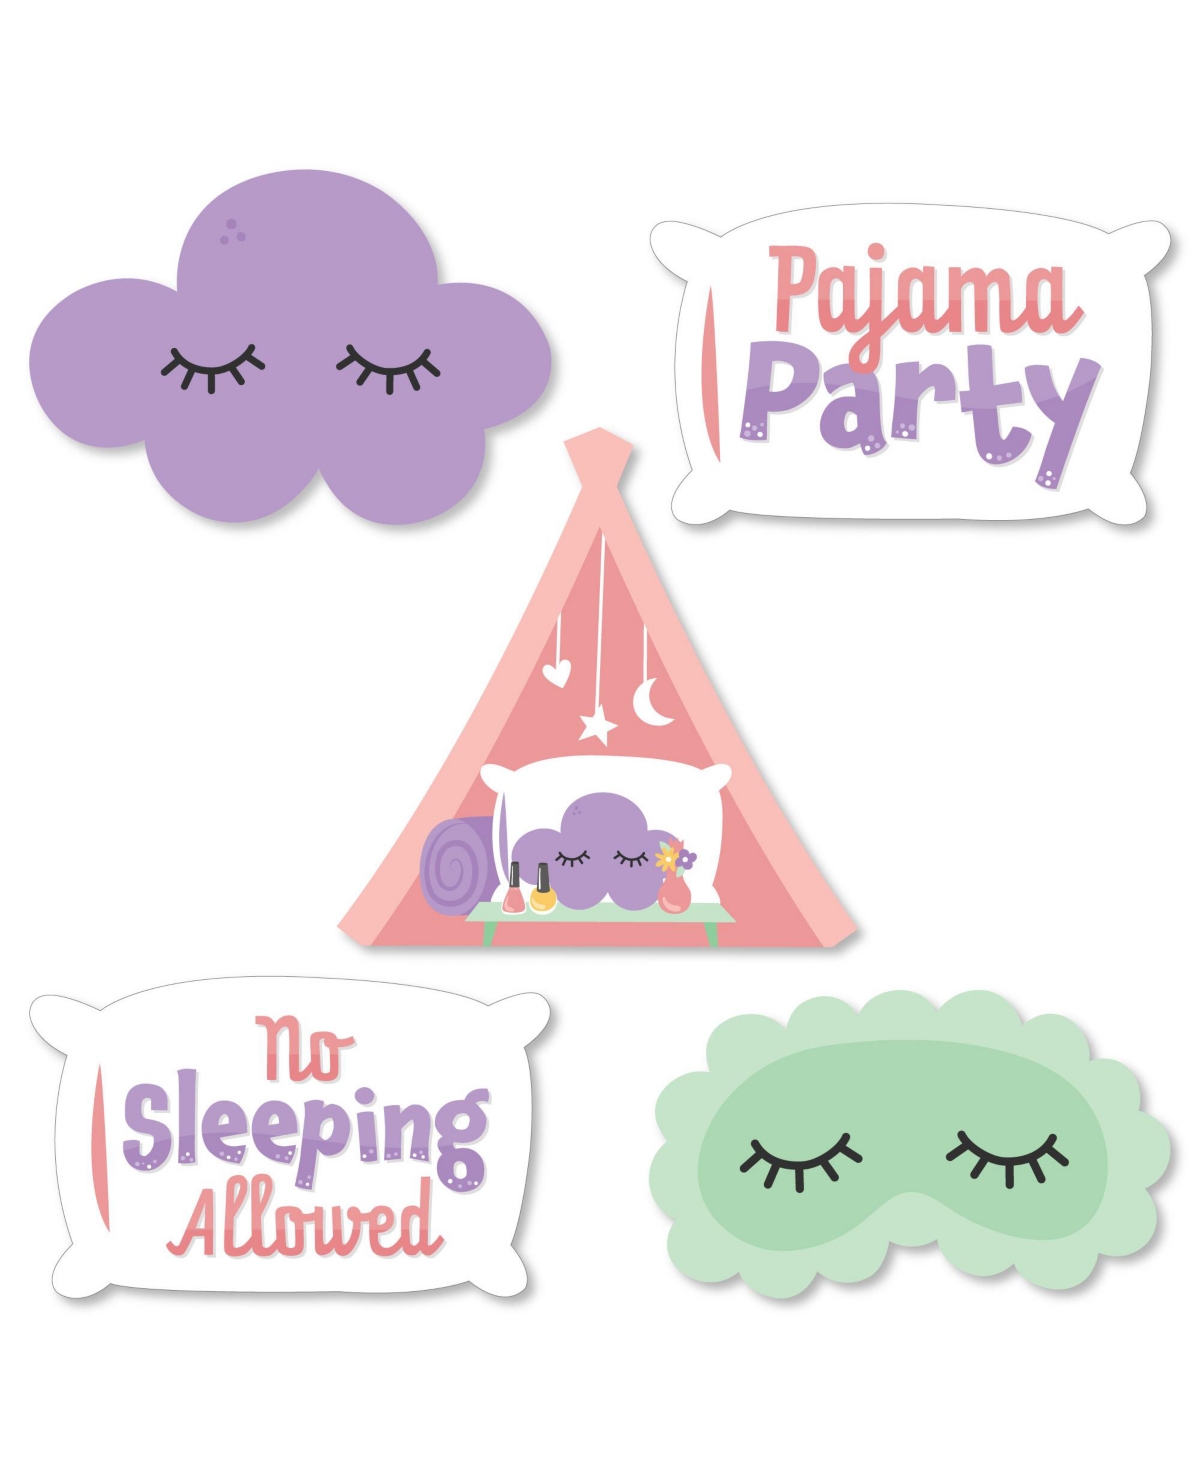 Pajama Slumber Party - Diy Shaped Girls Sleepover Birthday Party Cut-Outs 24 Ct